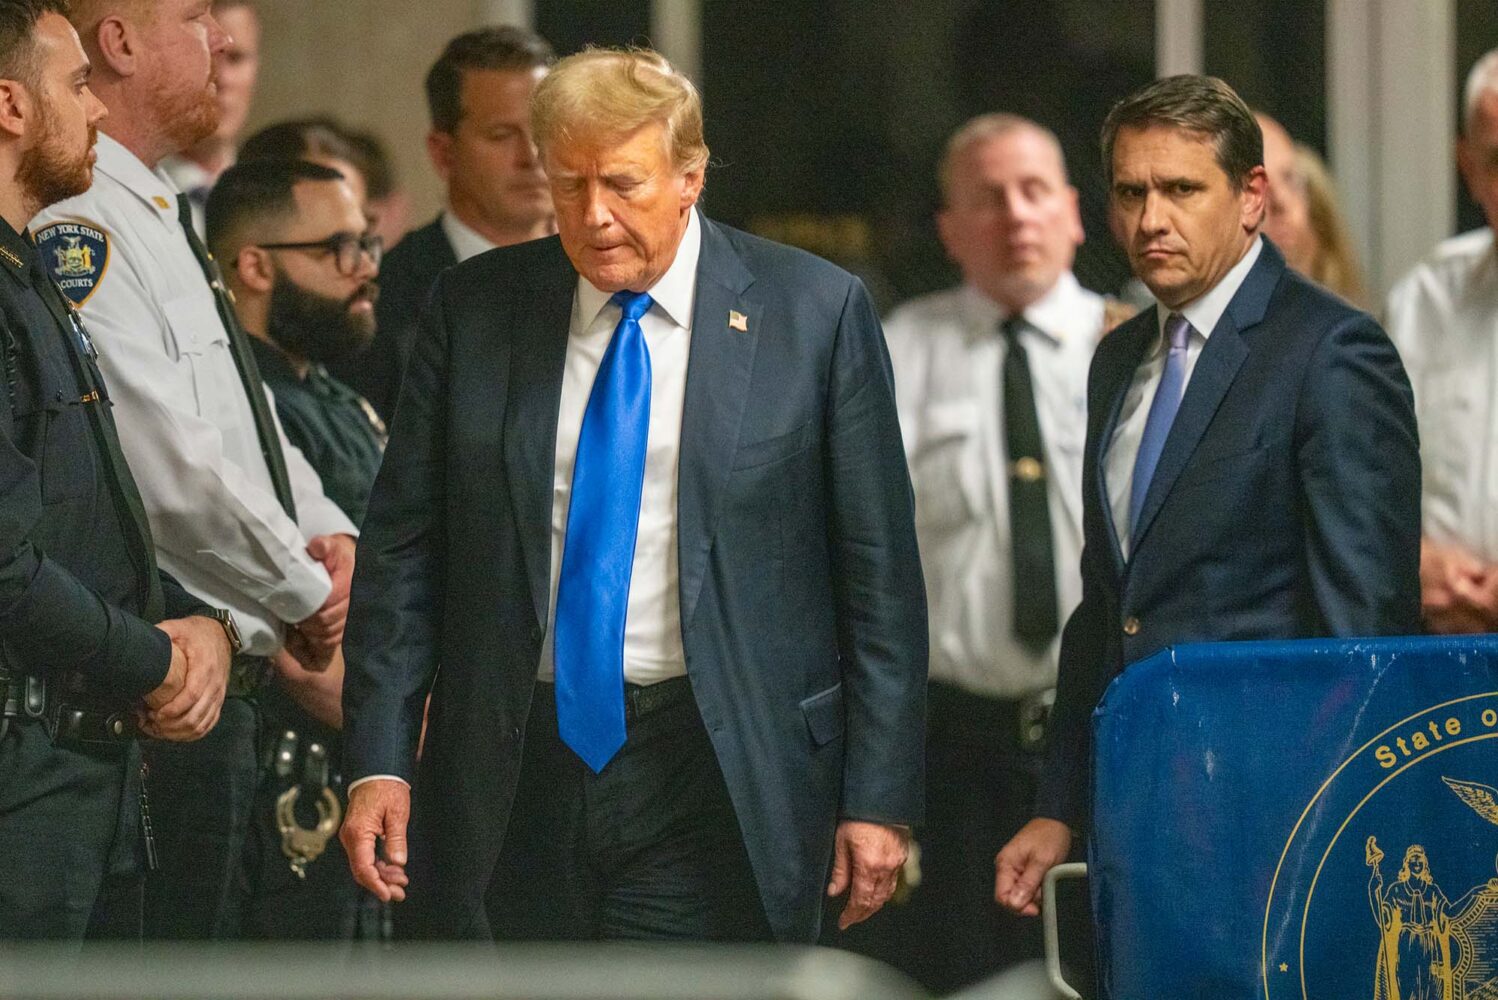 Photo: A picture of former U.S. President Donald Trump walking out of a courthouse. He is wearing a steel blue suit with a bright blue tie and an American flag pin on the jacket